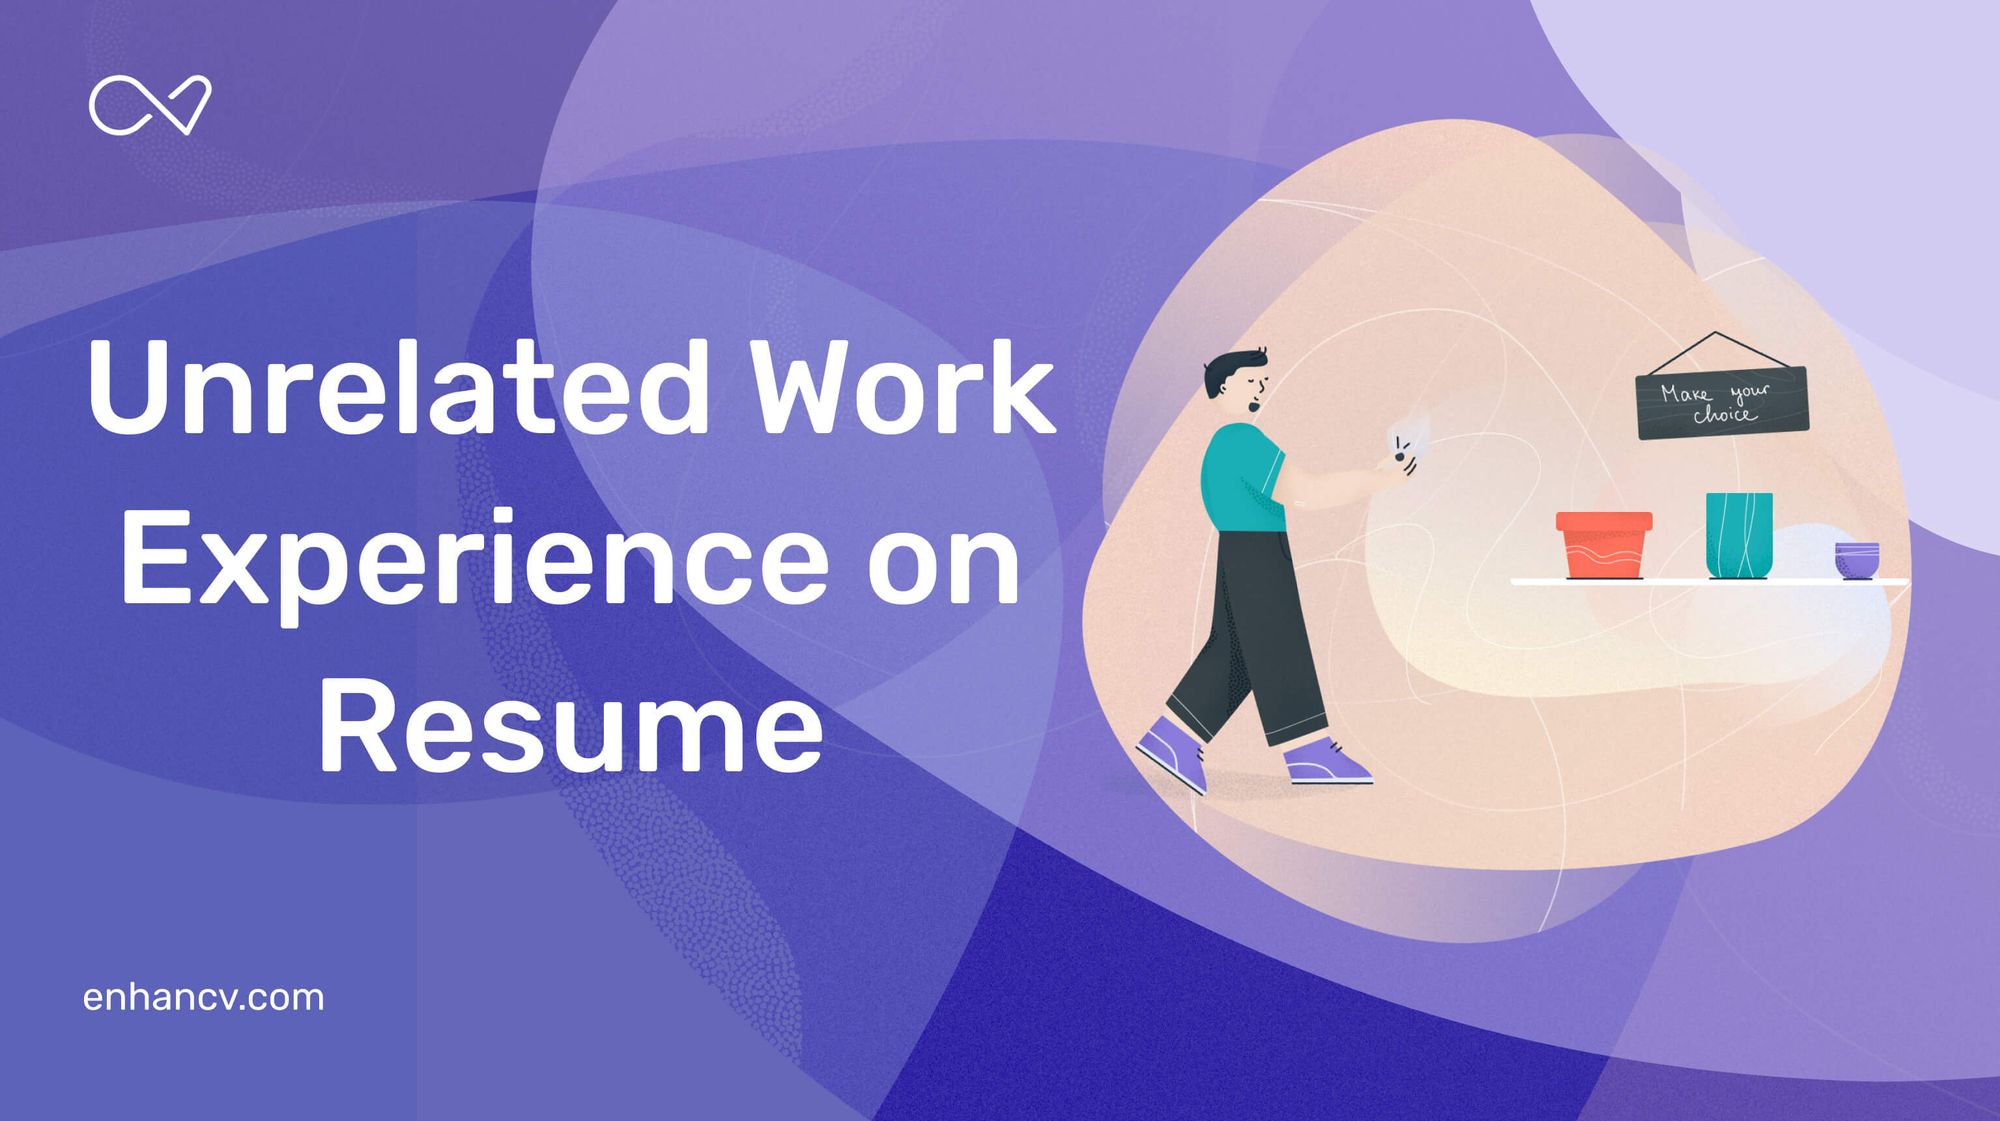 Should You Add Unrelated Work Experience on Your Resume?